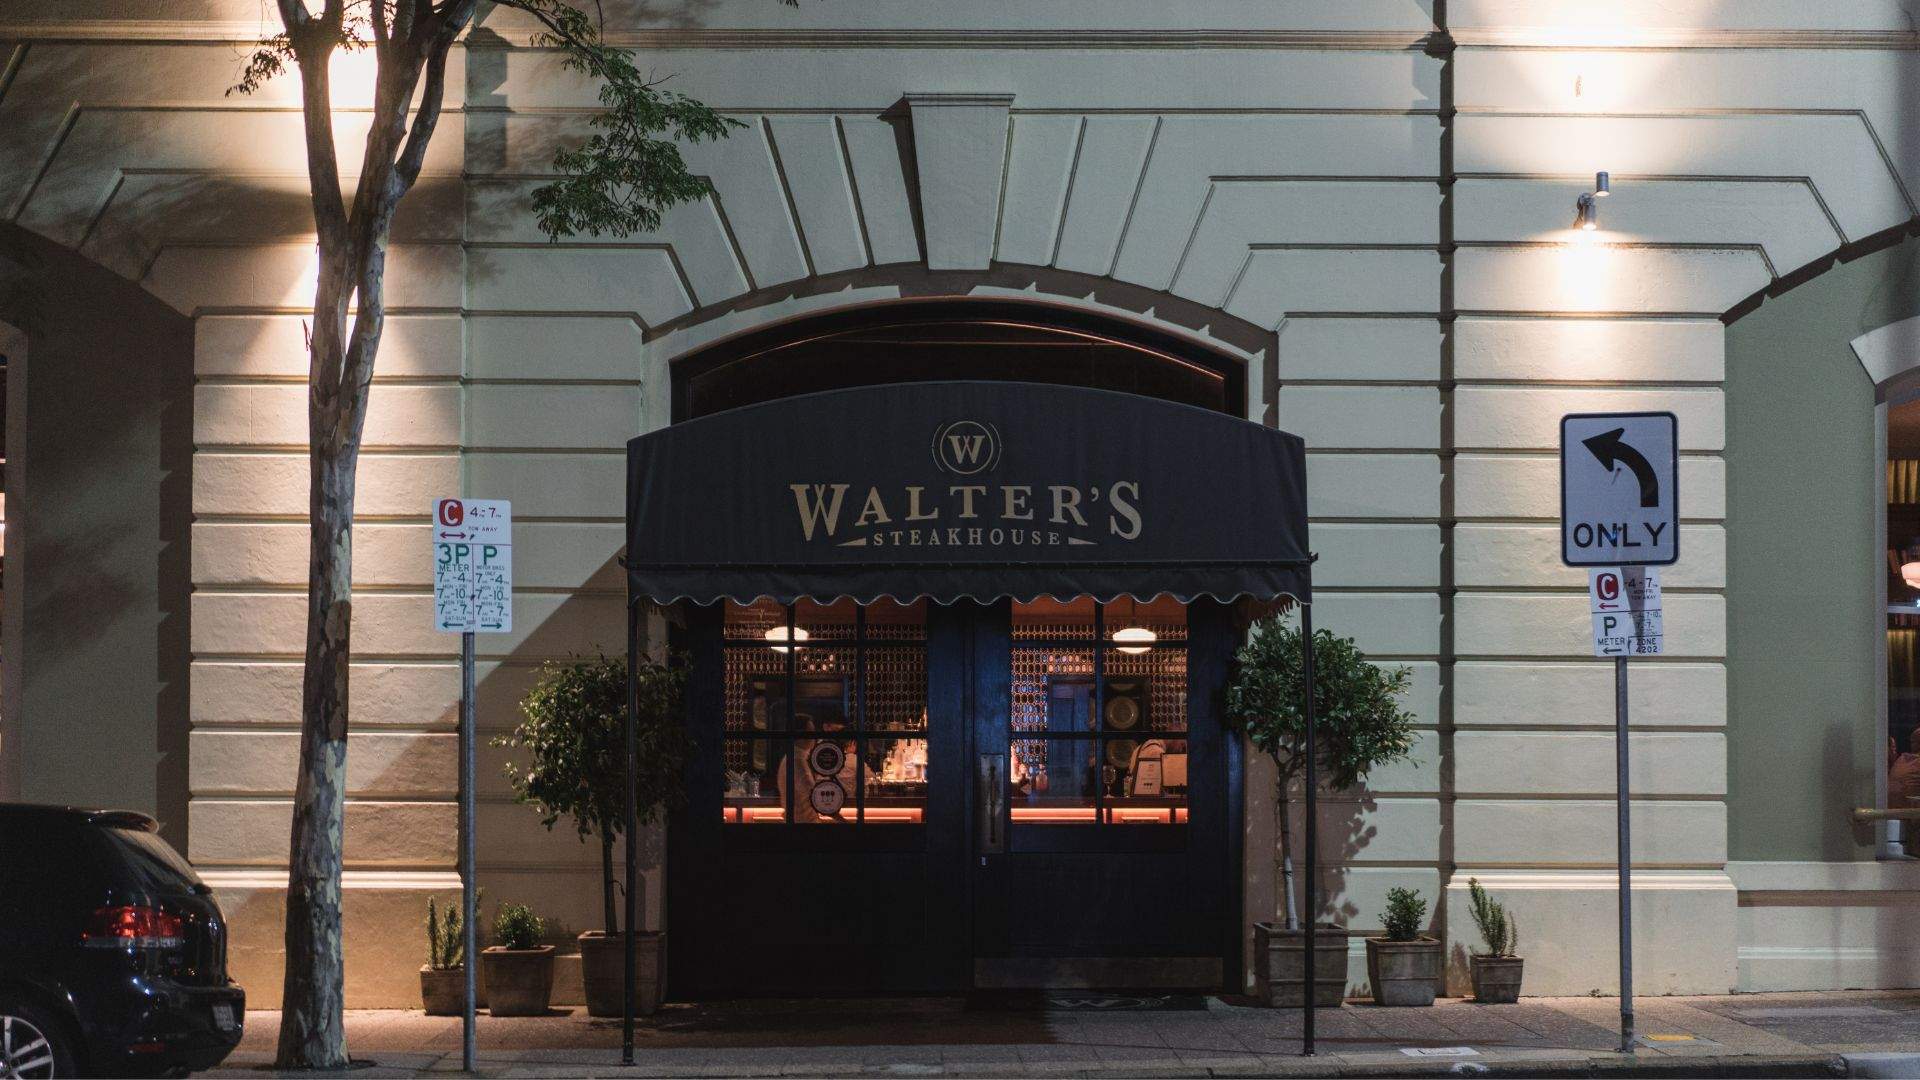 The exterior of Walter's Steakhouse & Wine Bar - home to one of the best steaks in Brisbane.